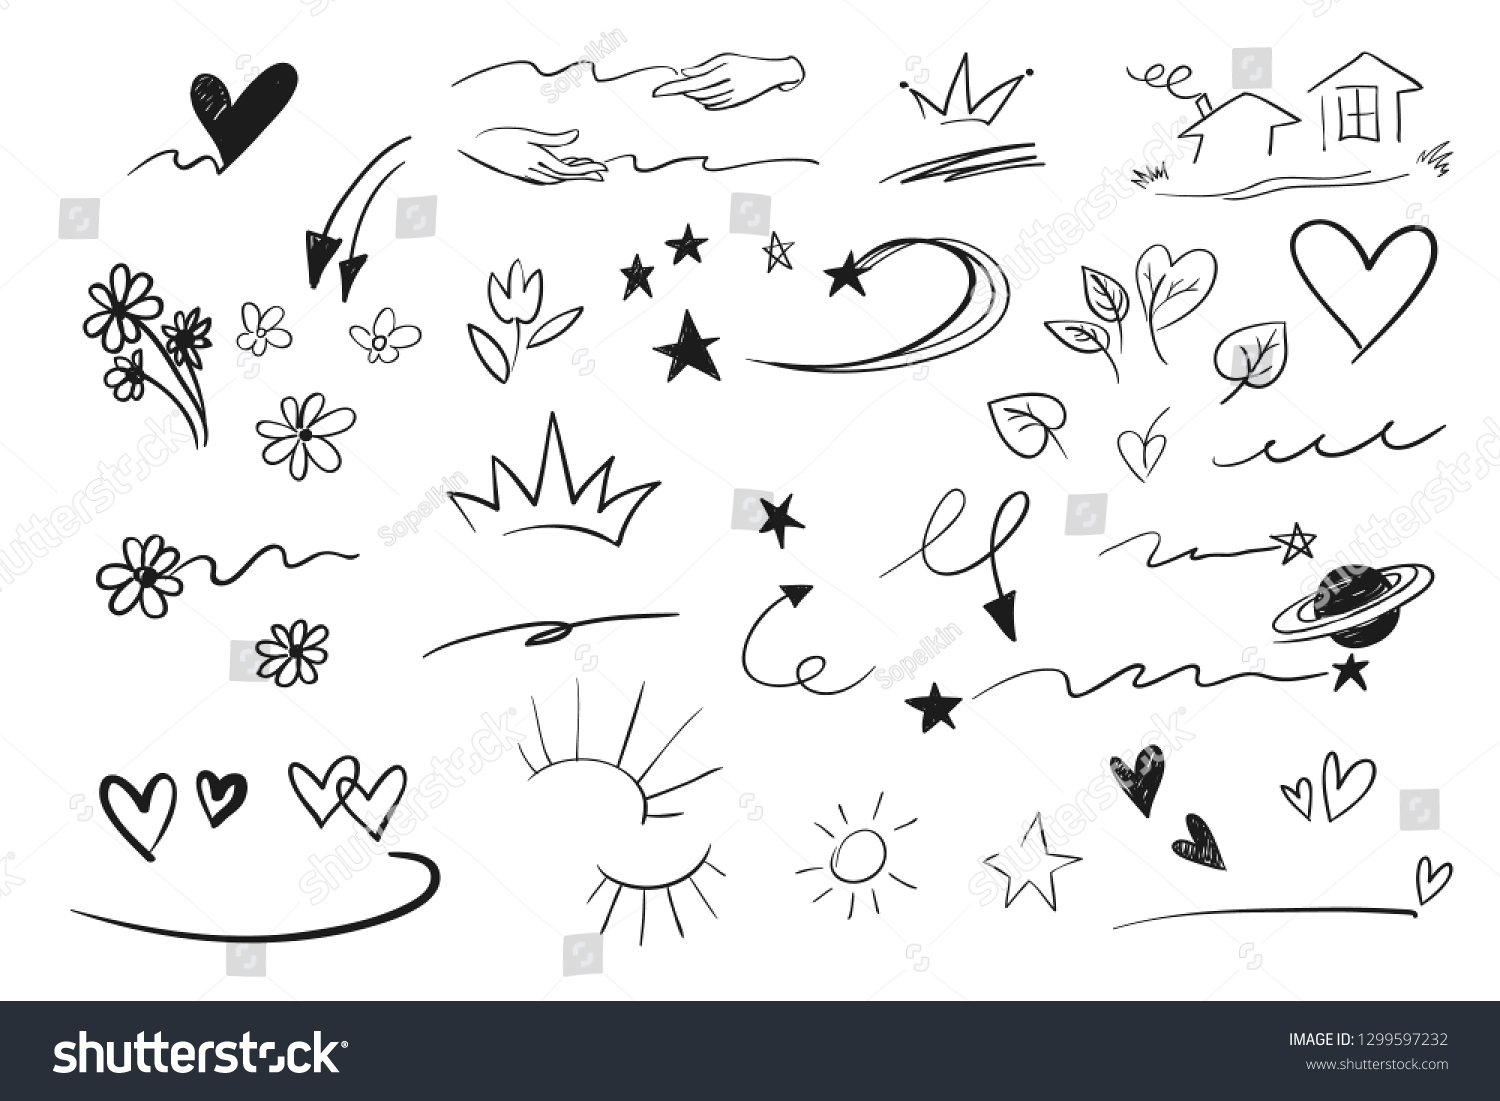 Hand drawn emphasis elements, black on white background. Vector symbols and logo. Arrow, heart, love, hand made, homemade, star, leaf, sun, light, flower, daisy, graffitti crown, king, queen #1299597232